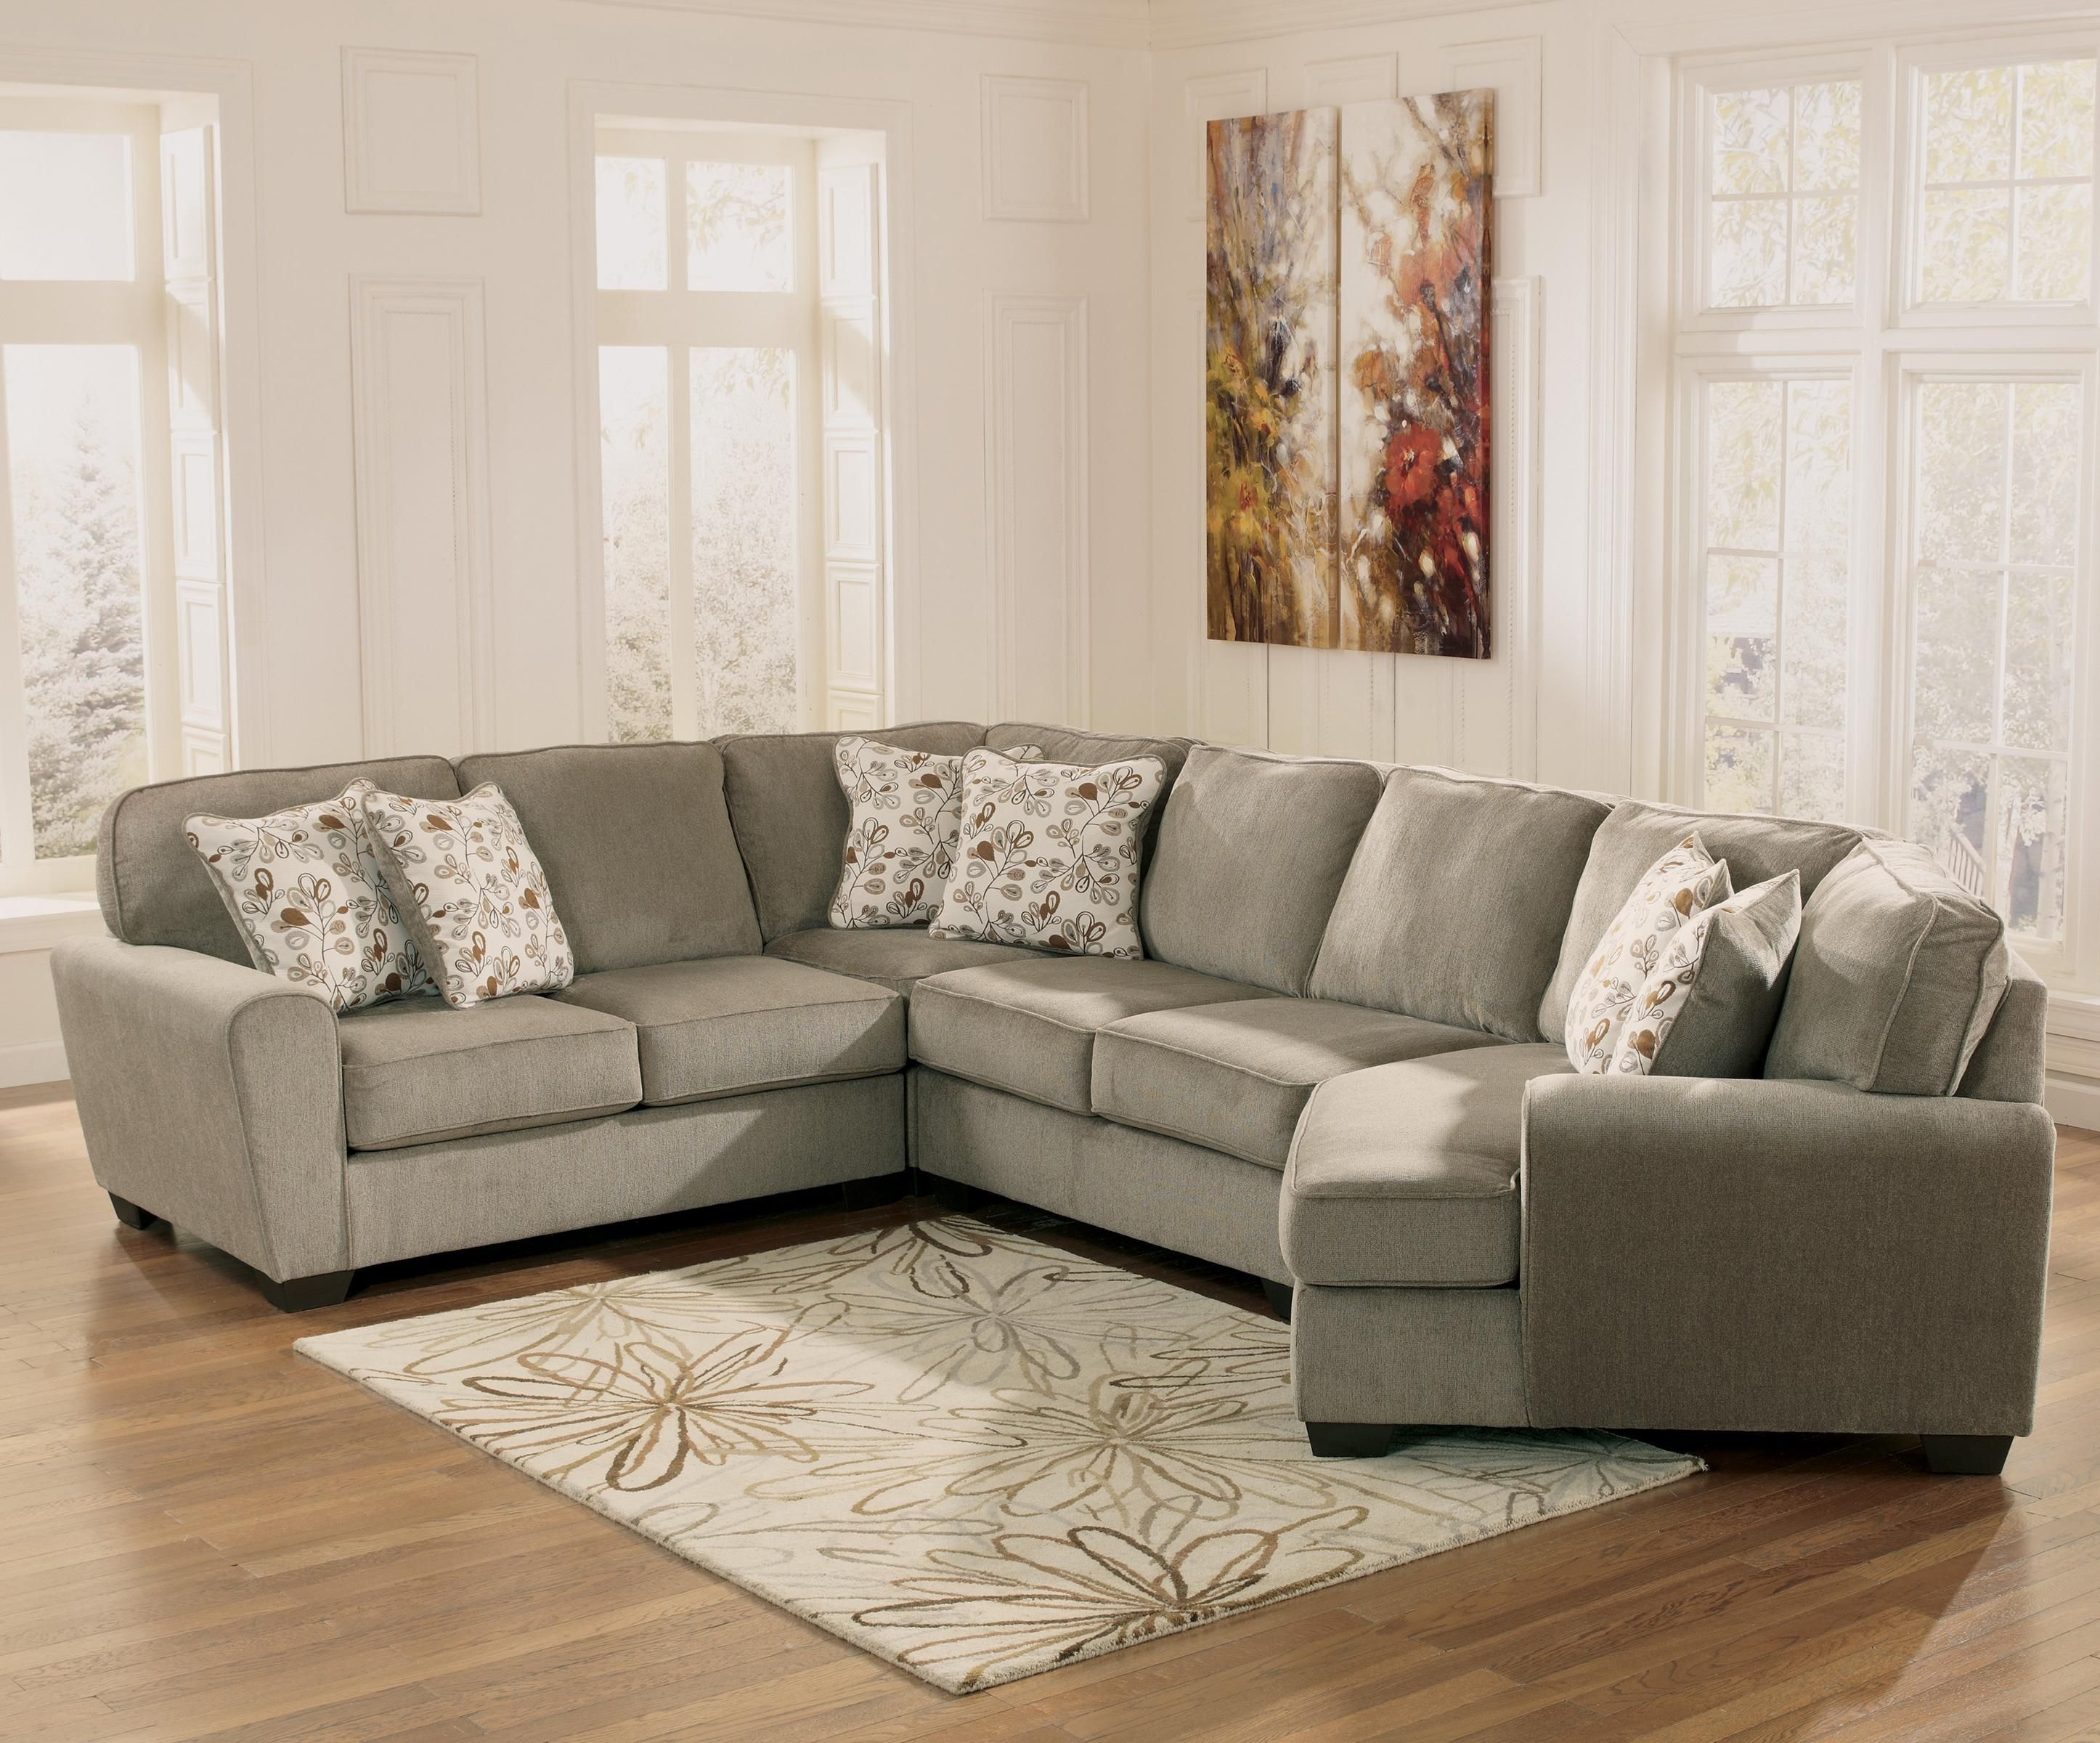 Ashley Furniture Patola Park – Patina 4 Piece Small Sectional With With Green Bay Wi Sectional Sofas (View 7 of 10)